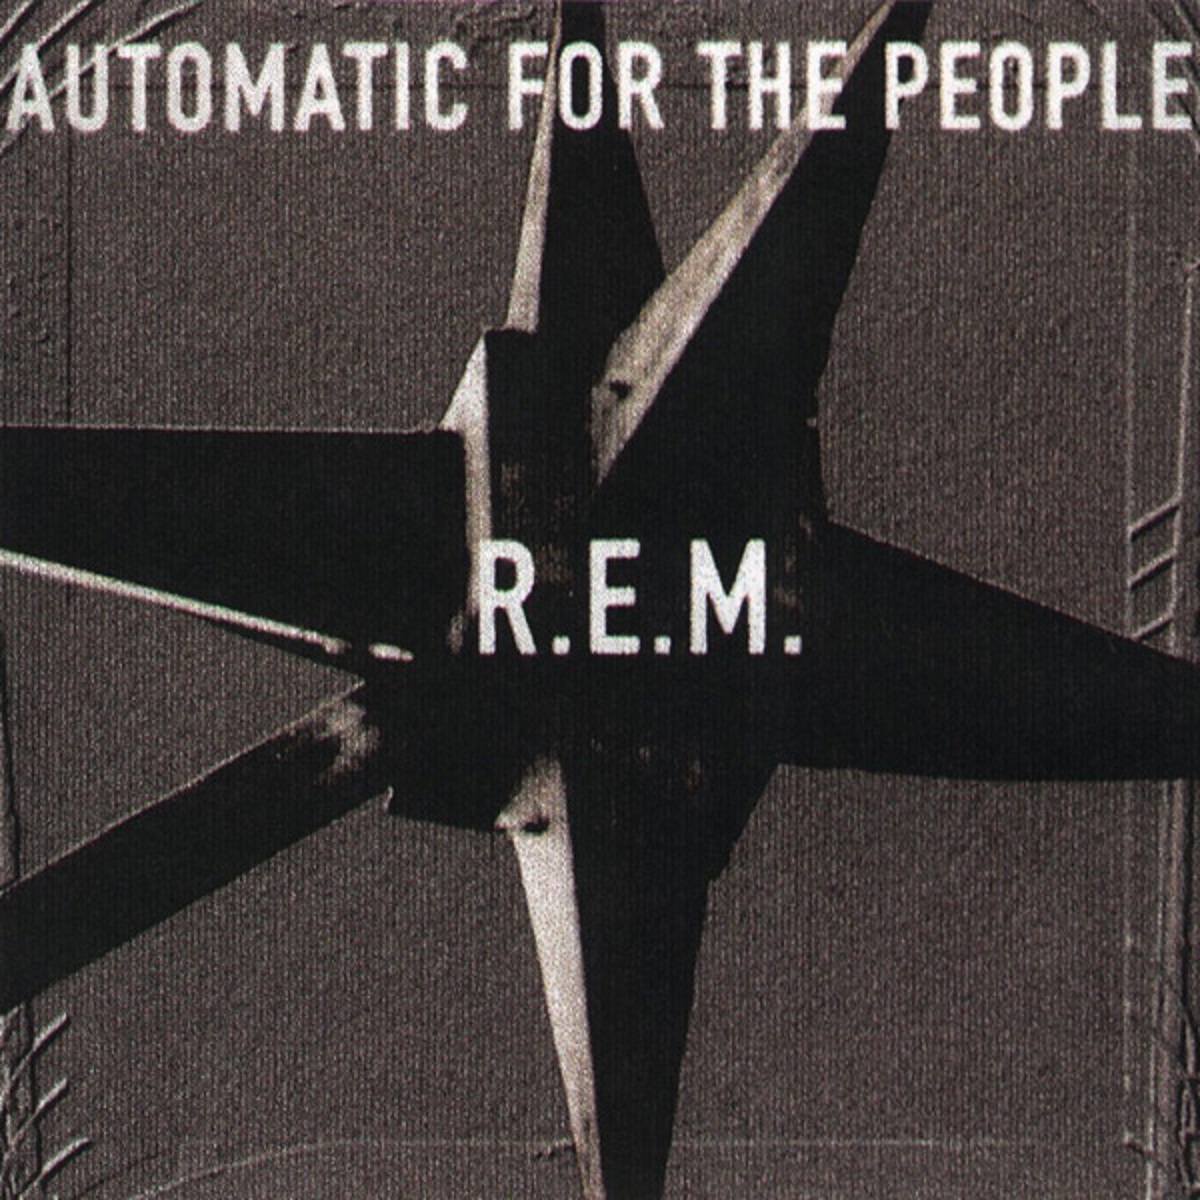 Обложка альбома «Automatic for the People» группы R.E.M.